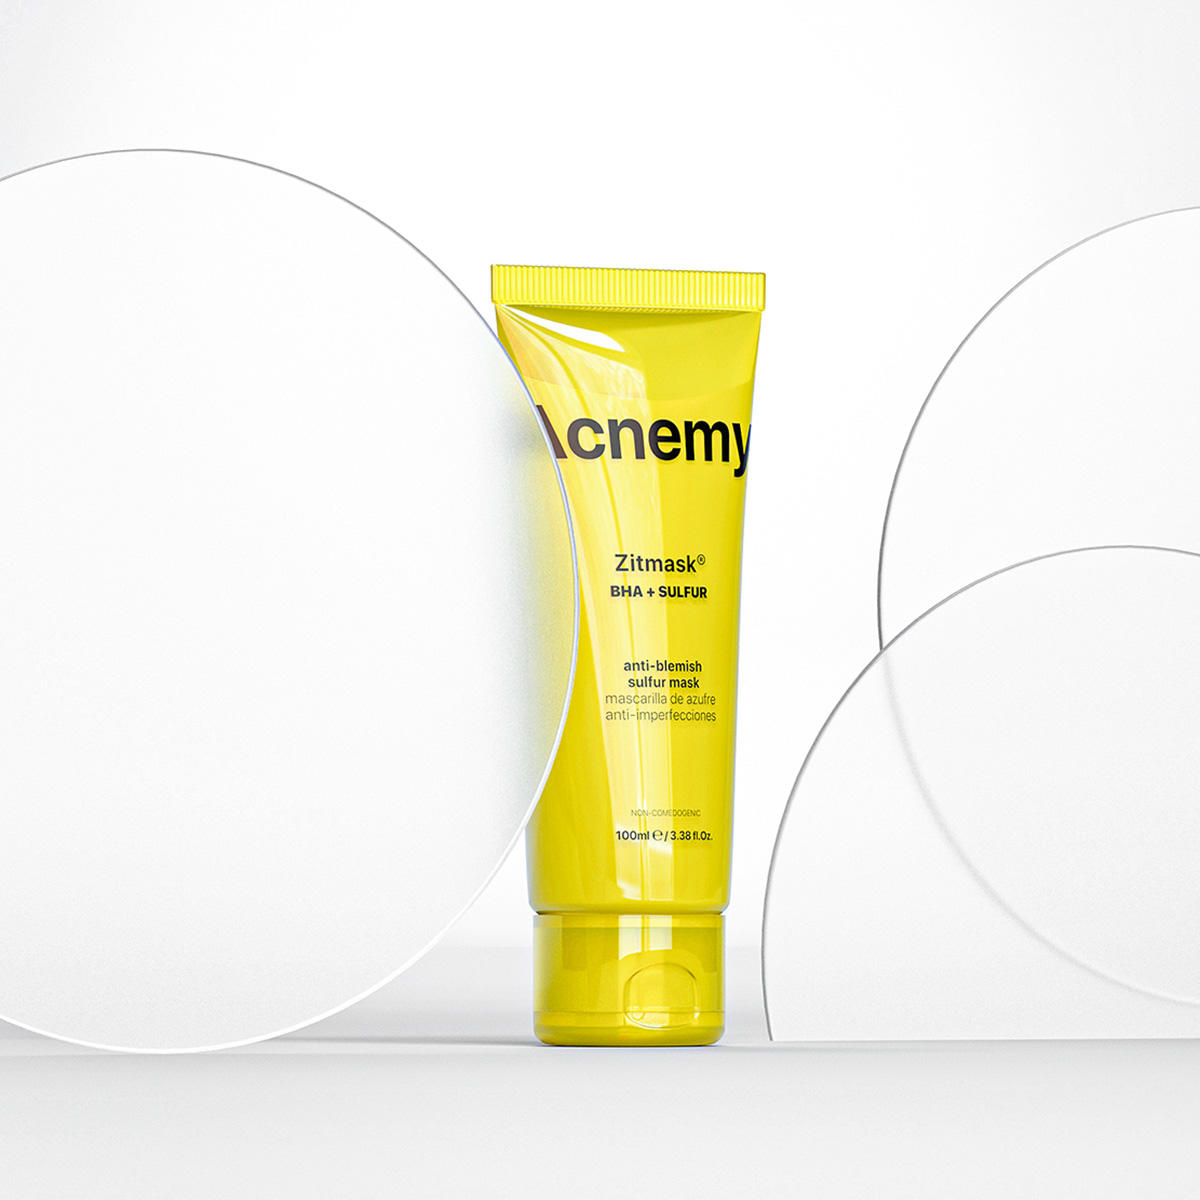 Acnemy Zitmask® anti-pimple mask with sulphur 100 ml - 4